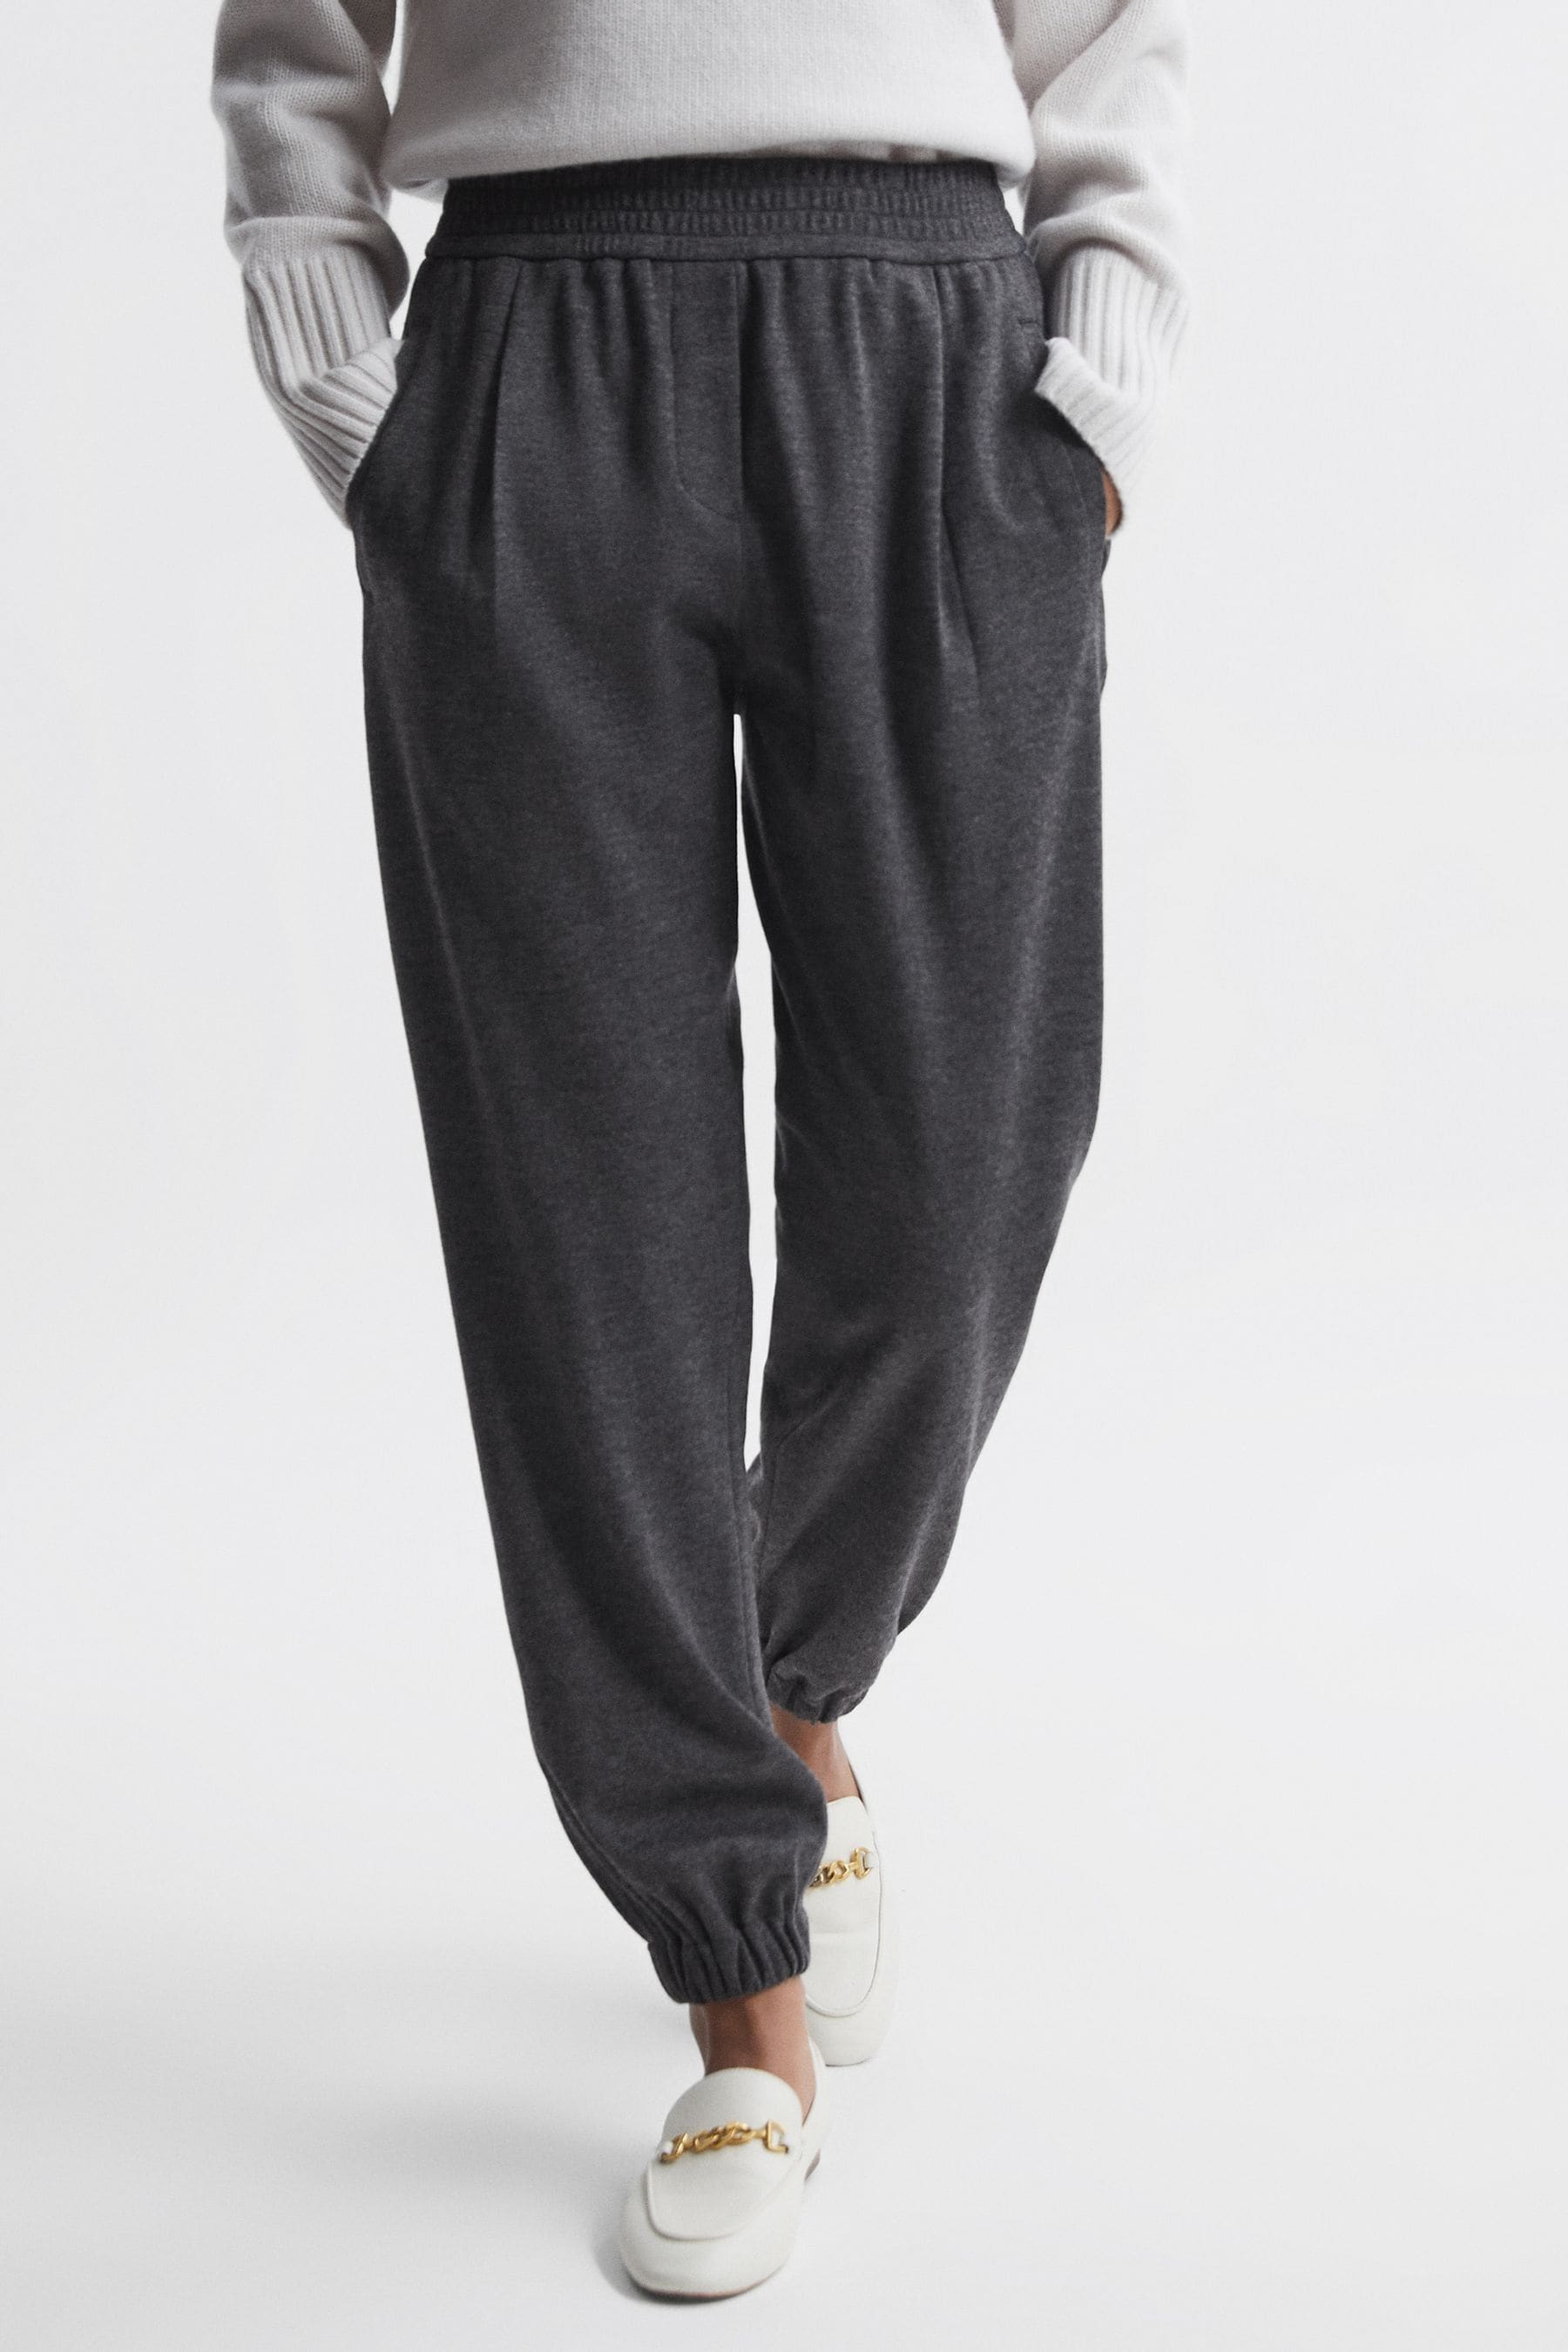 Reiss Karina - Charcoal Wool Elasticated Pleat Front Joggers, Us 4